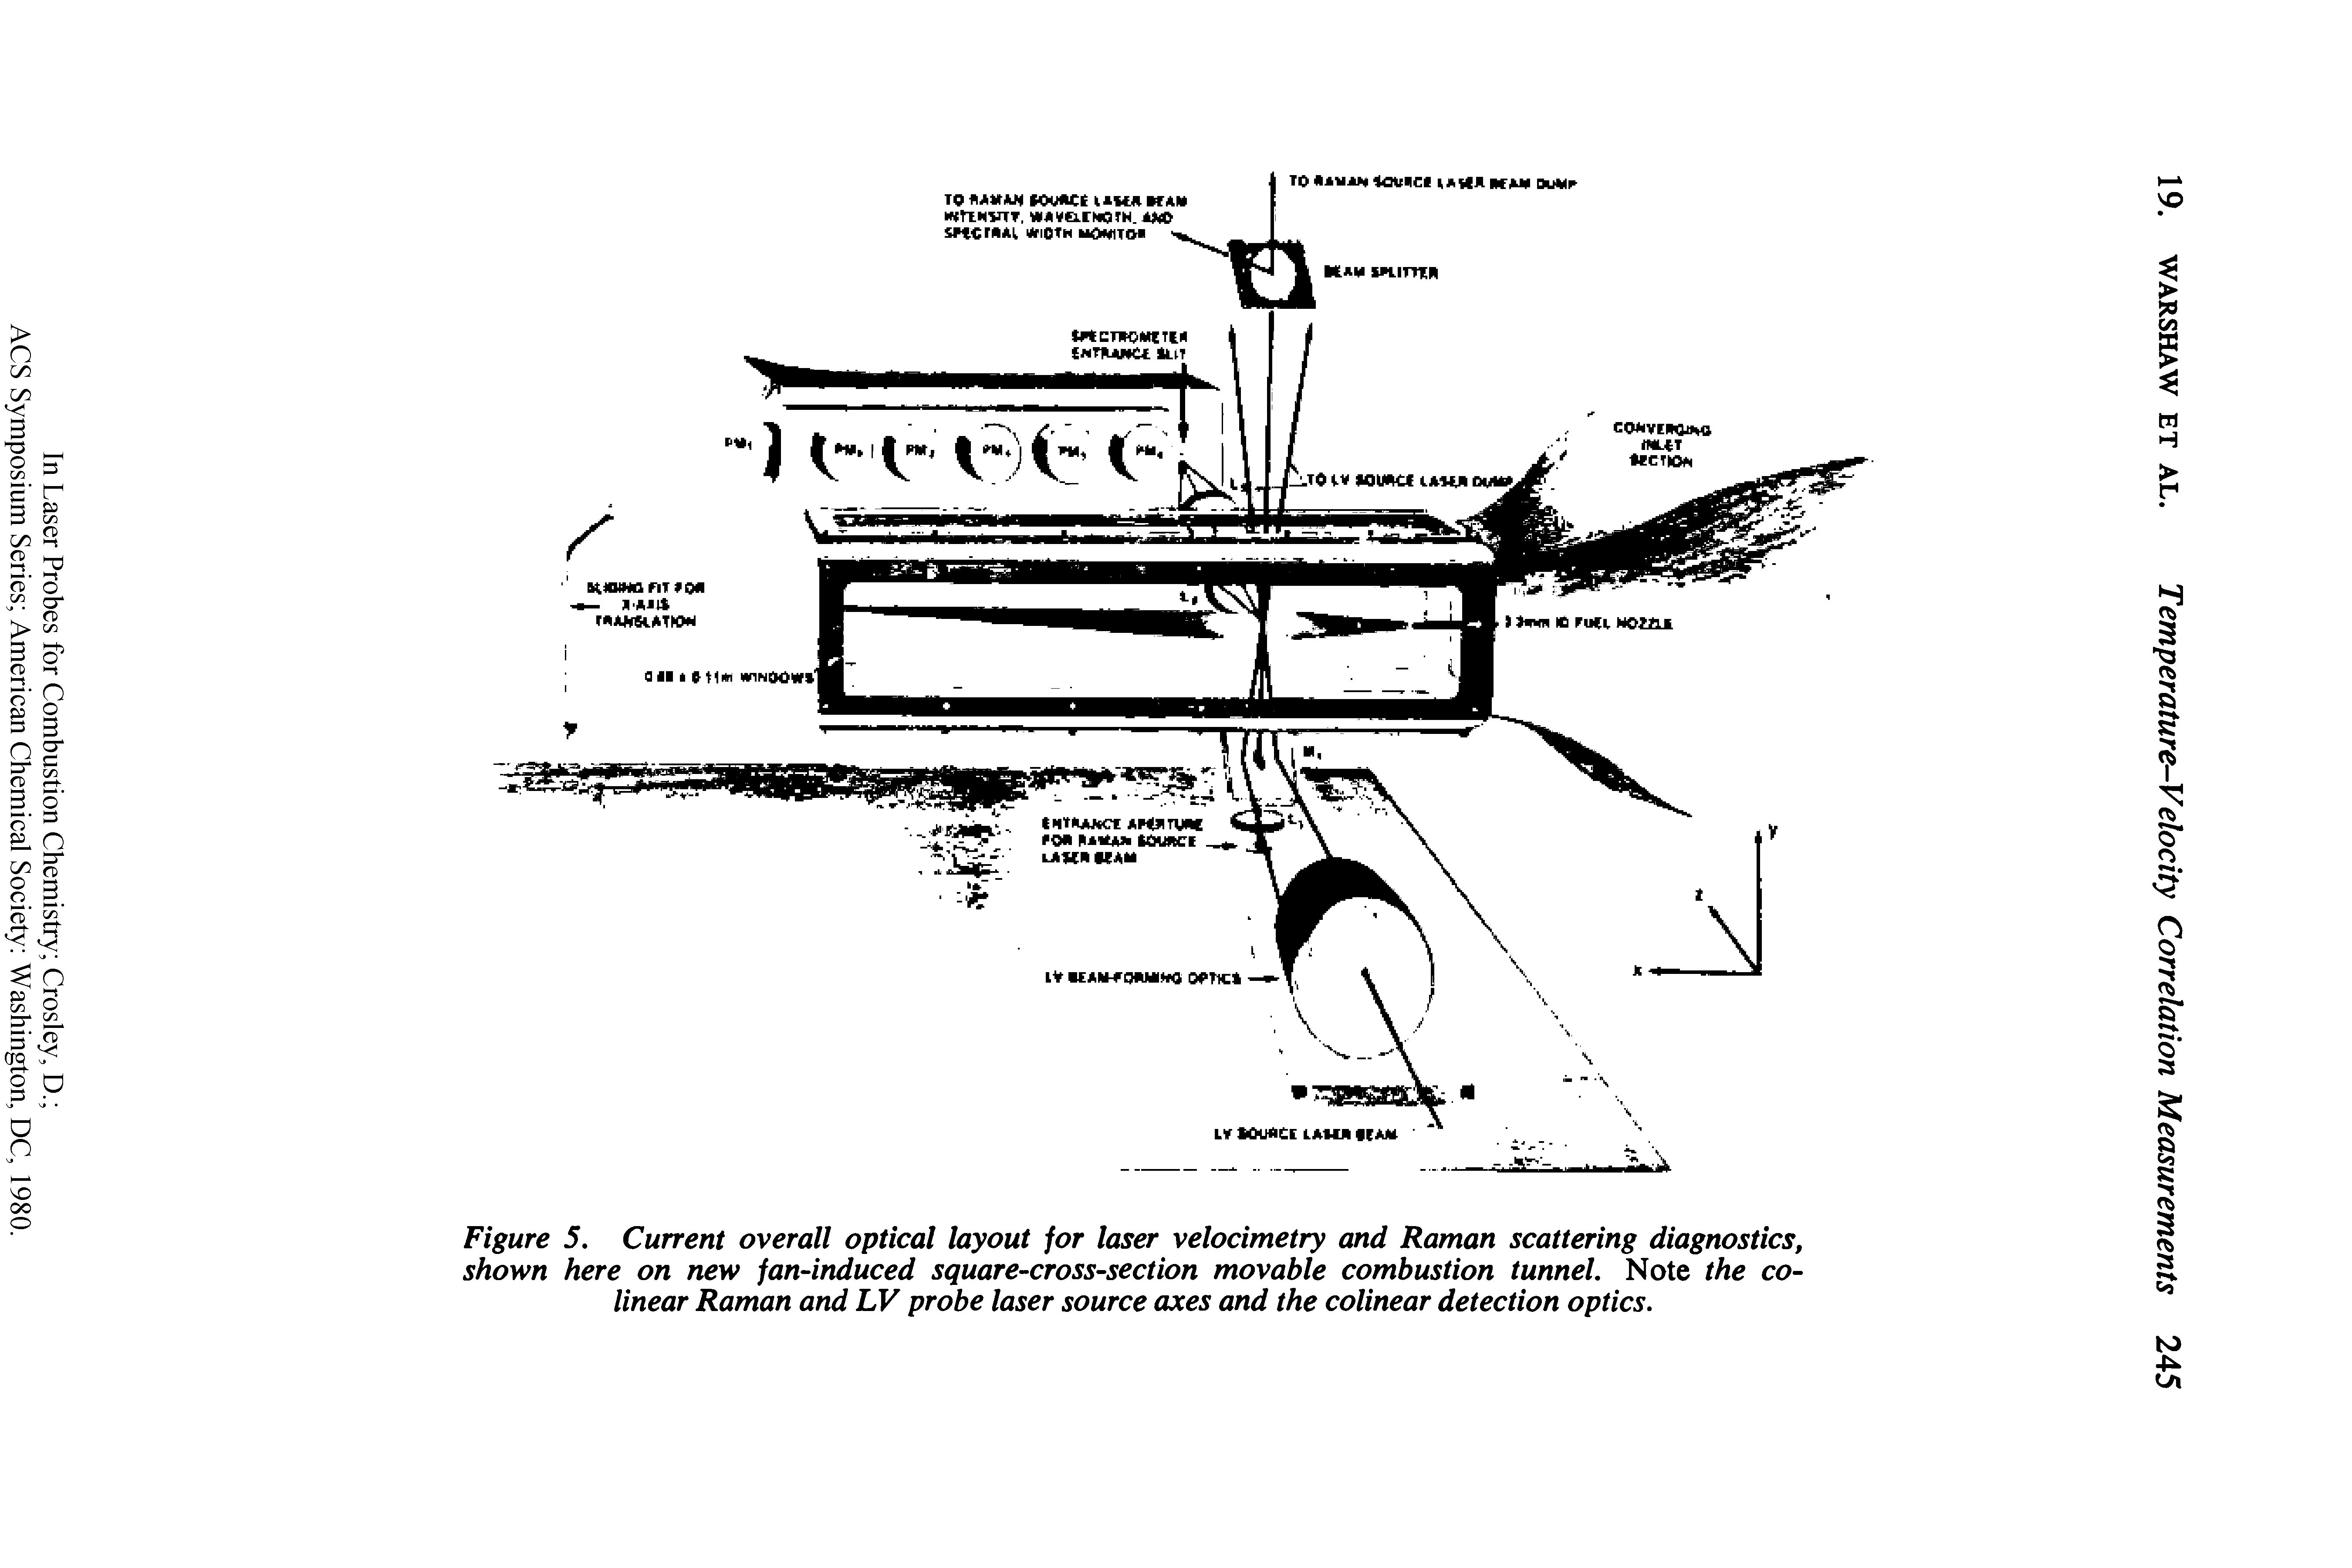 Figure 5. Current overall optical layout for laser velocimetry and Raman scattering diagnostics, shown here on new fan-induced square-cross-section movable combustion tunnel. Note the co-linear Raman and LV probe laser source axes and the colinear detection optics.